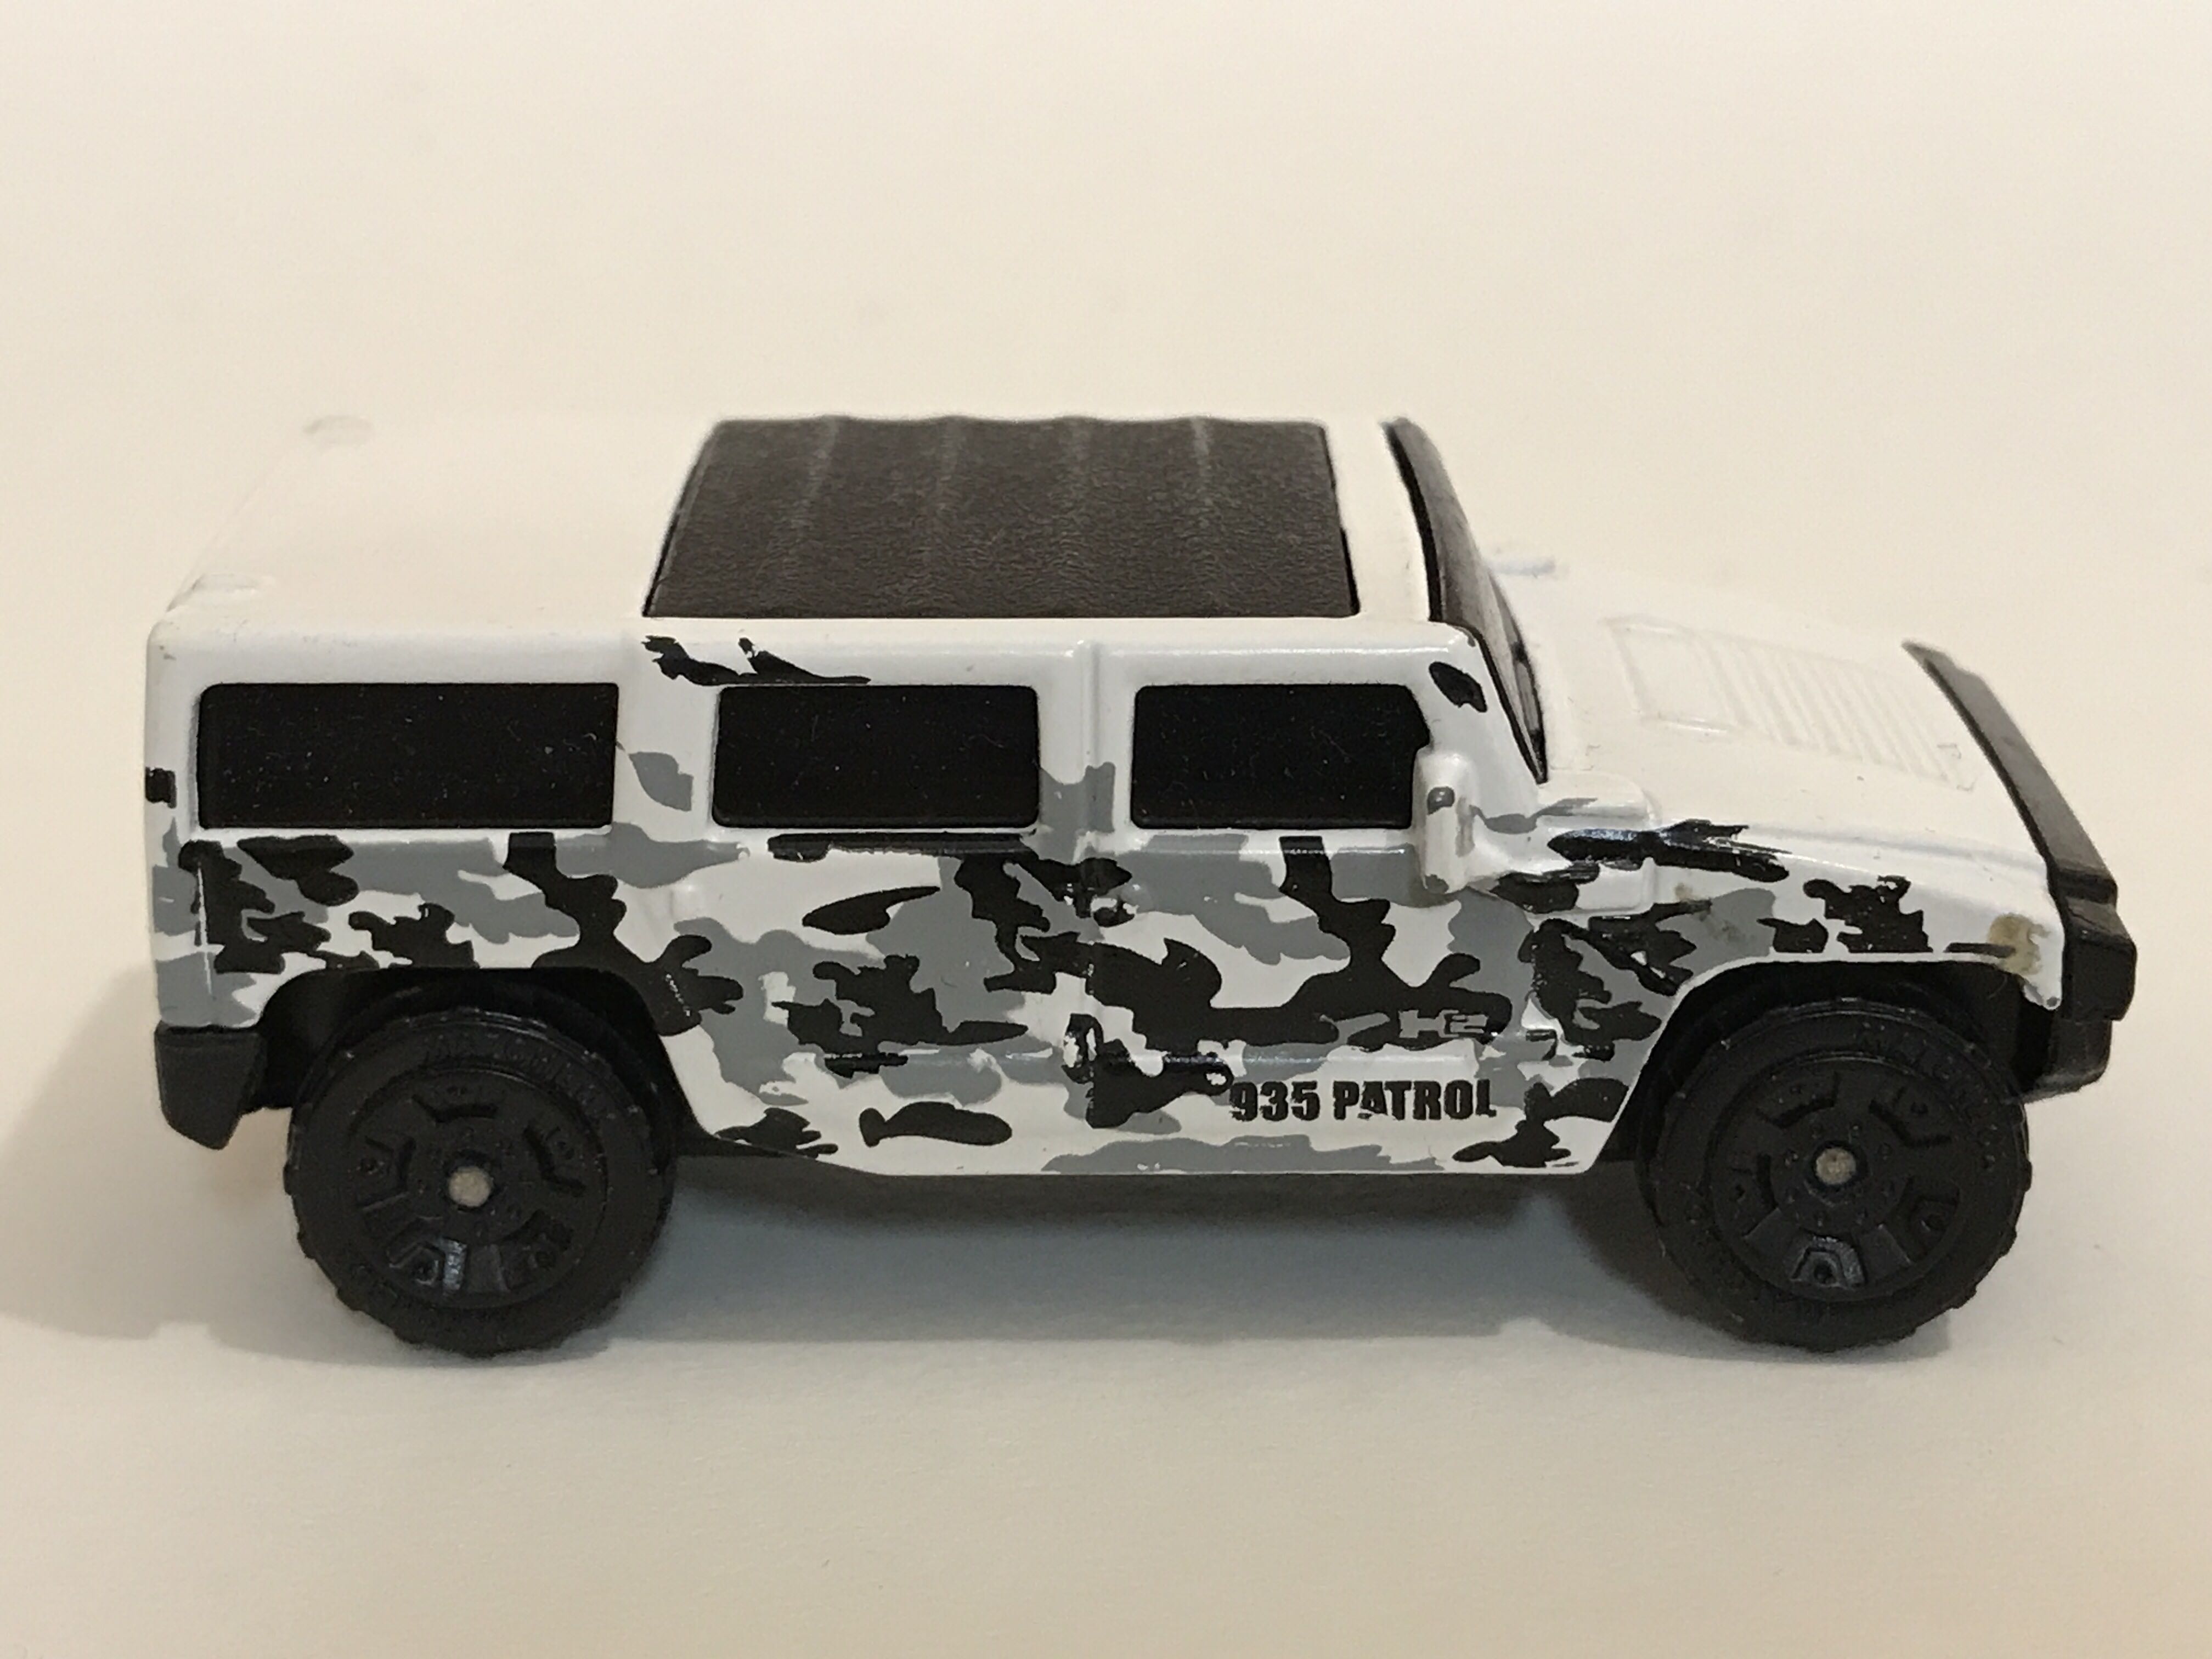 Hummer H2 SUV Concept - 2006 - MBX 1-75 toy car collectible - Main Image 3